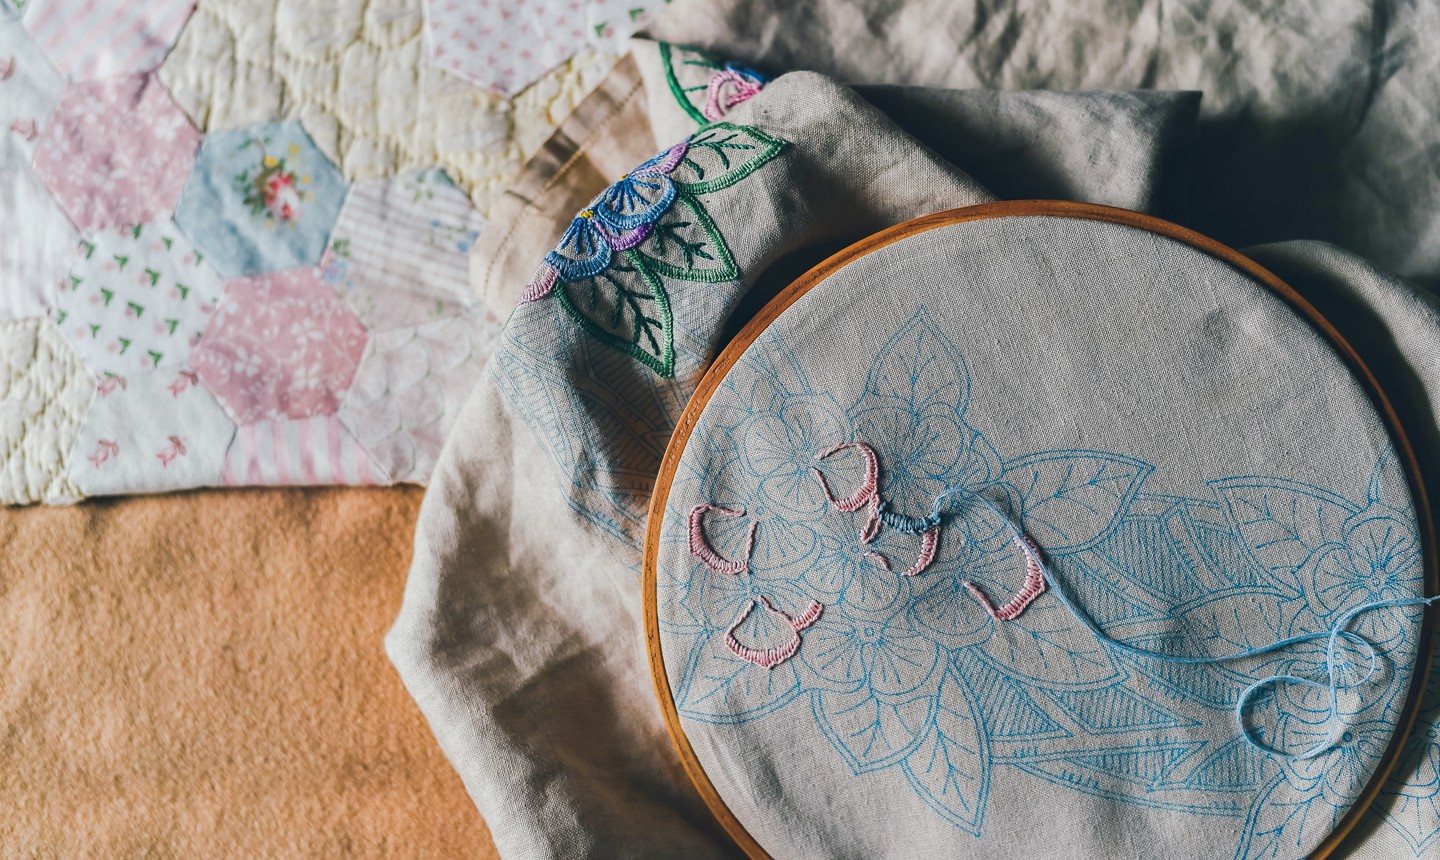 How To Create Embroidery Patterns 5 Simple Ways To Transfer Embroidery Designs